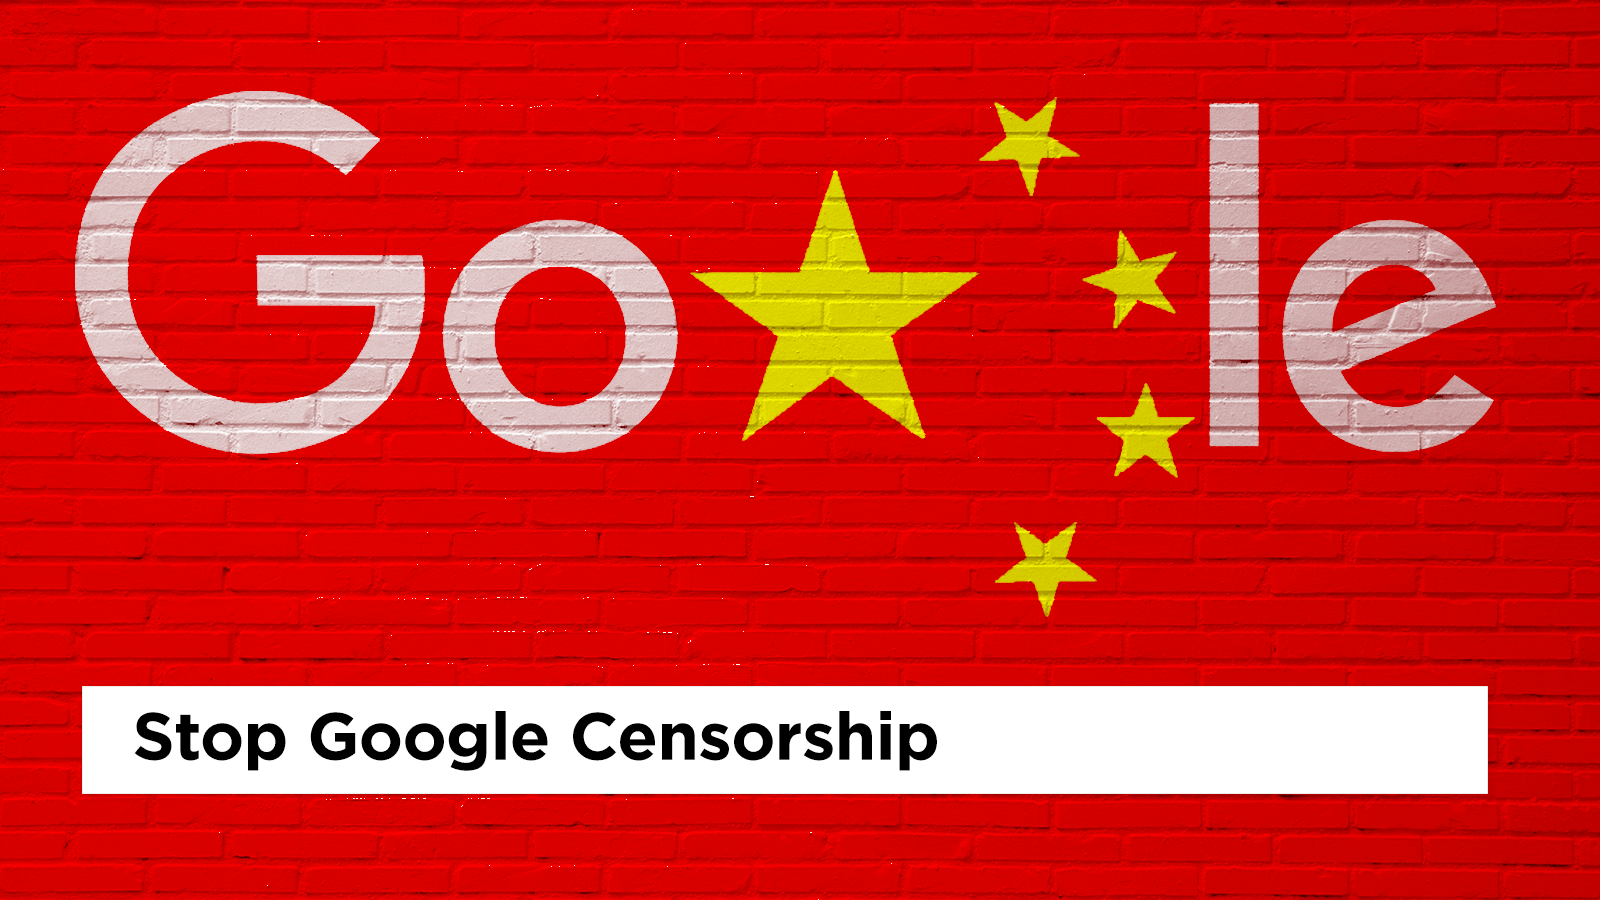 Tibetan, Uyghur and Chinese activists unite with Digital tech experts to tell Google: “Respect Human Rights, Don’t do China’s Dirty Work”. Cancel Project Dragonfly